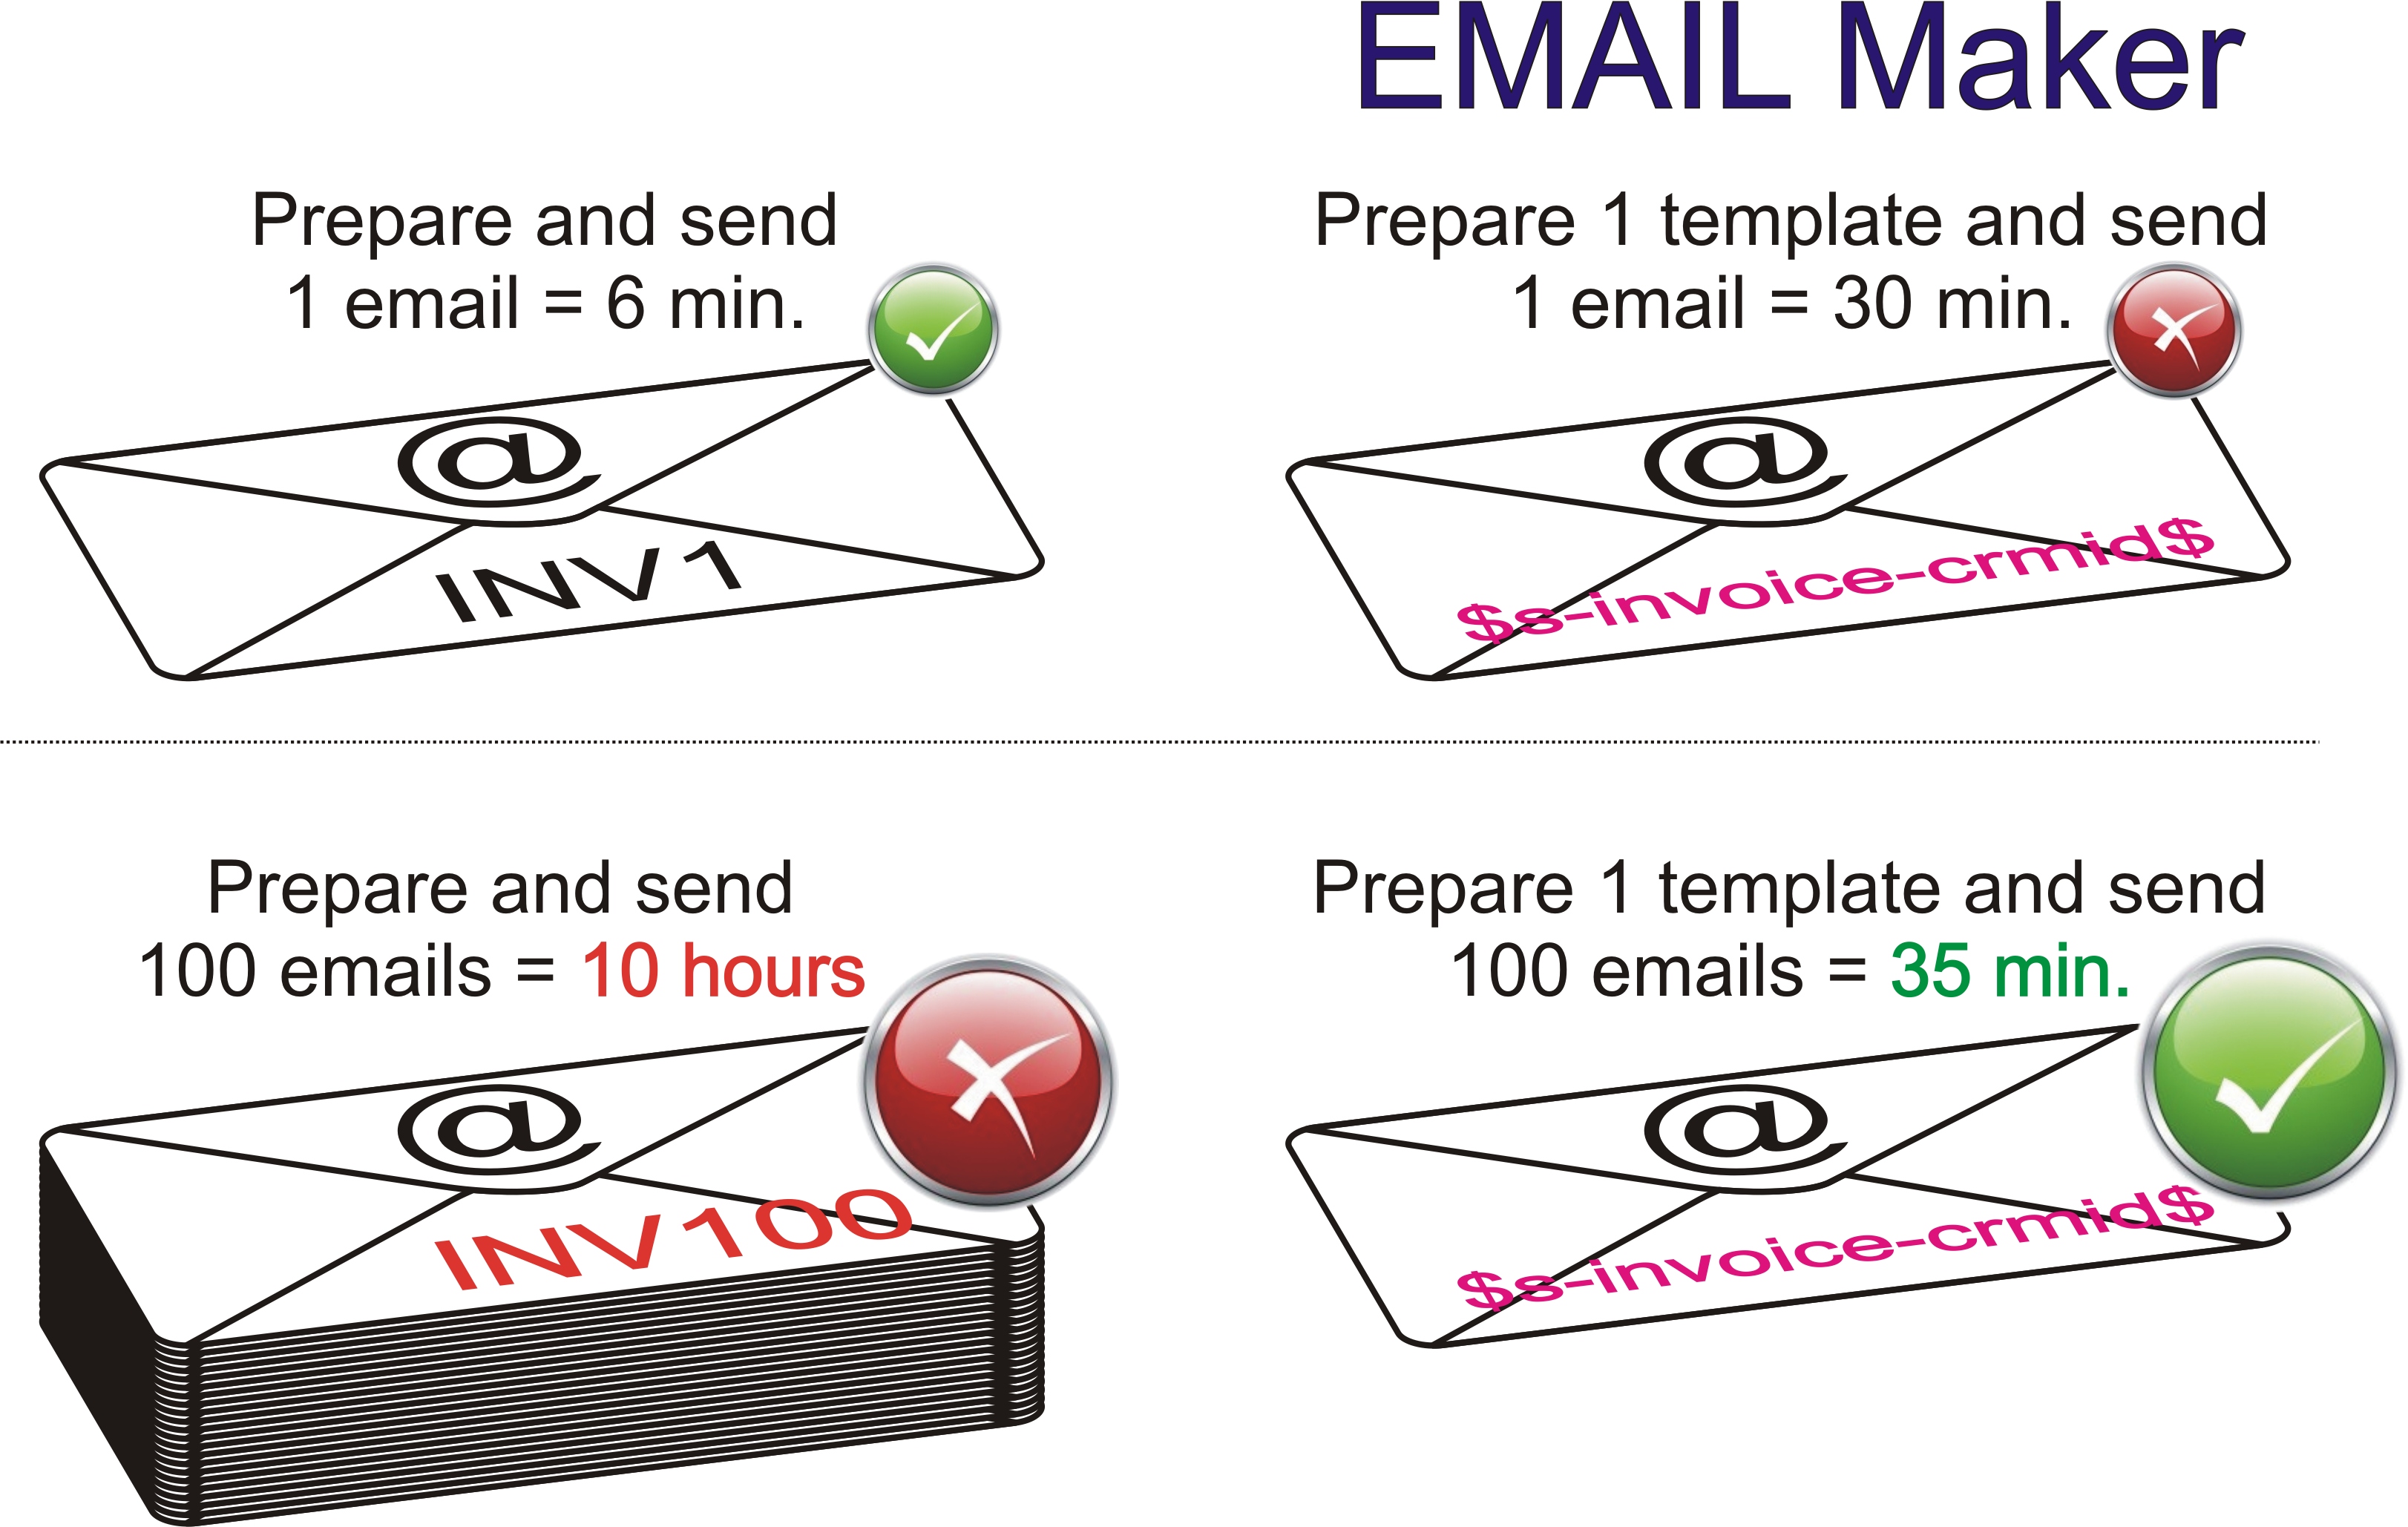 Who needs EMAIL Maker?